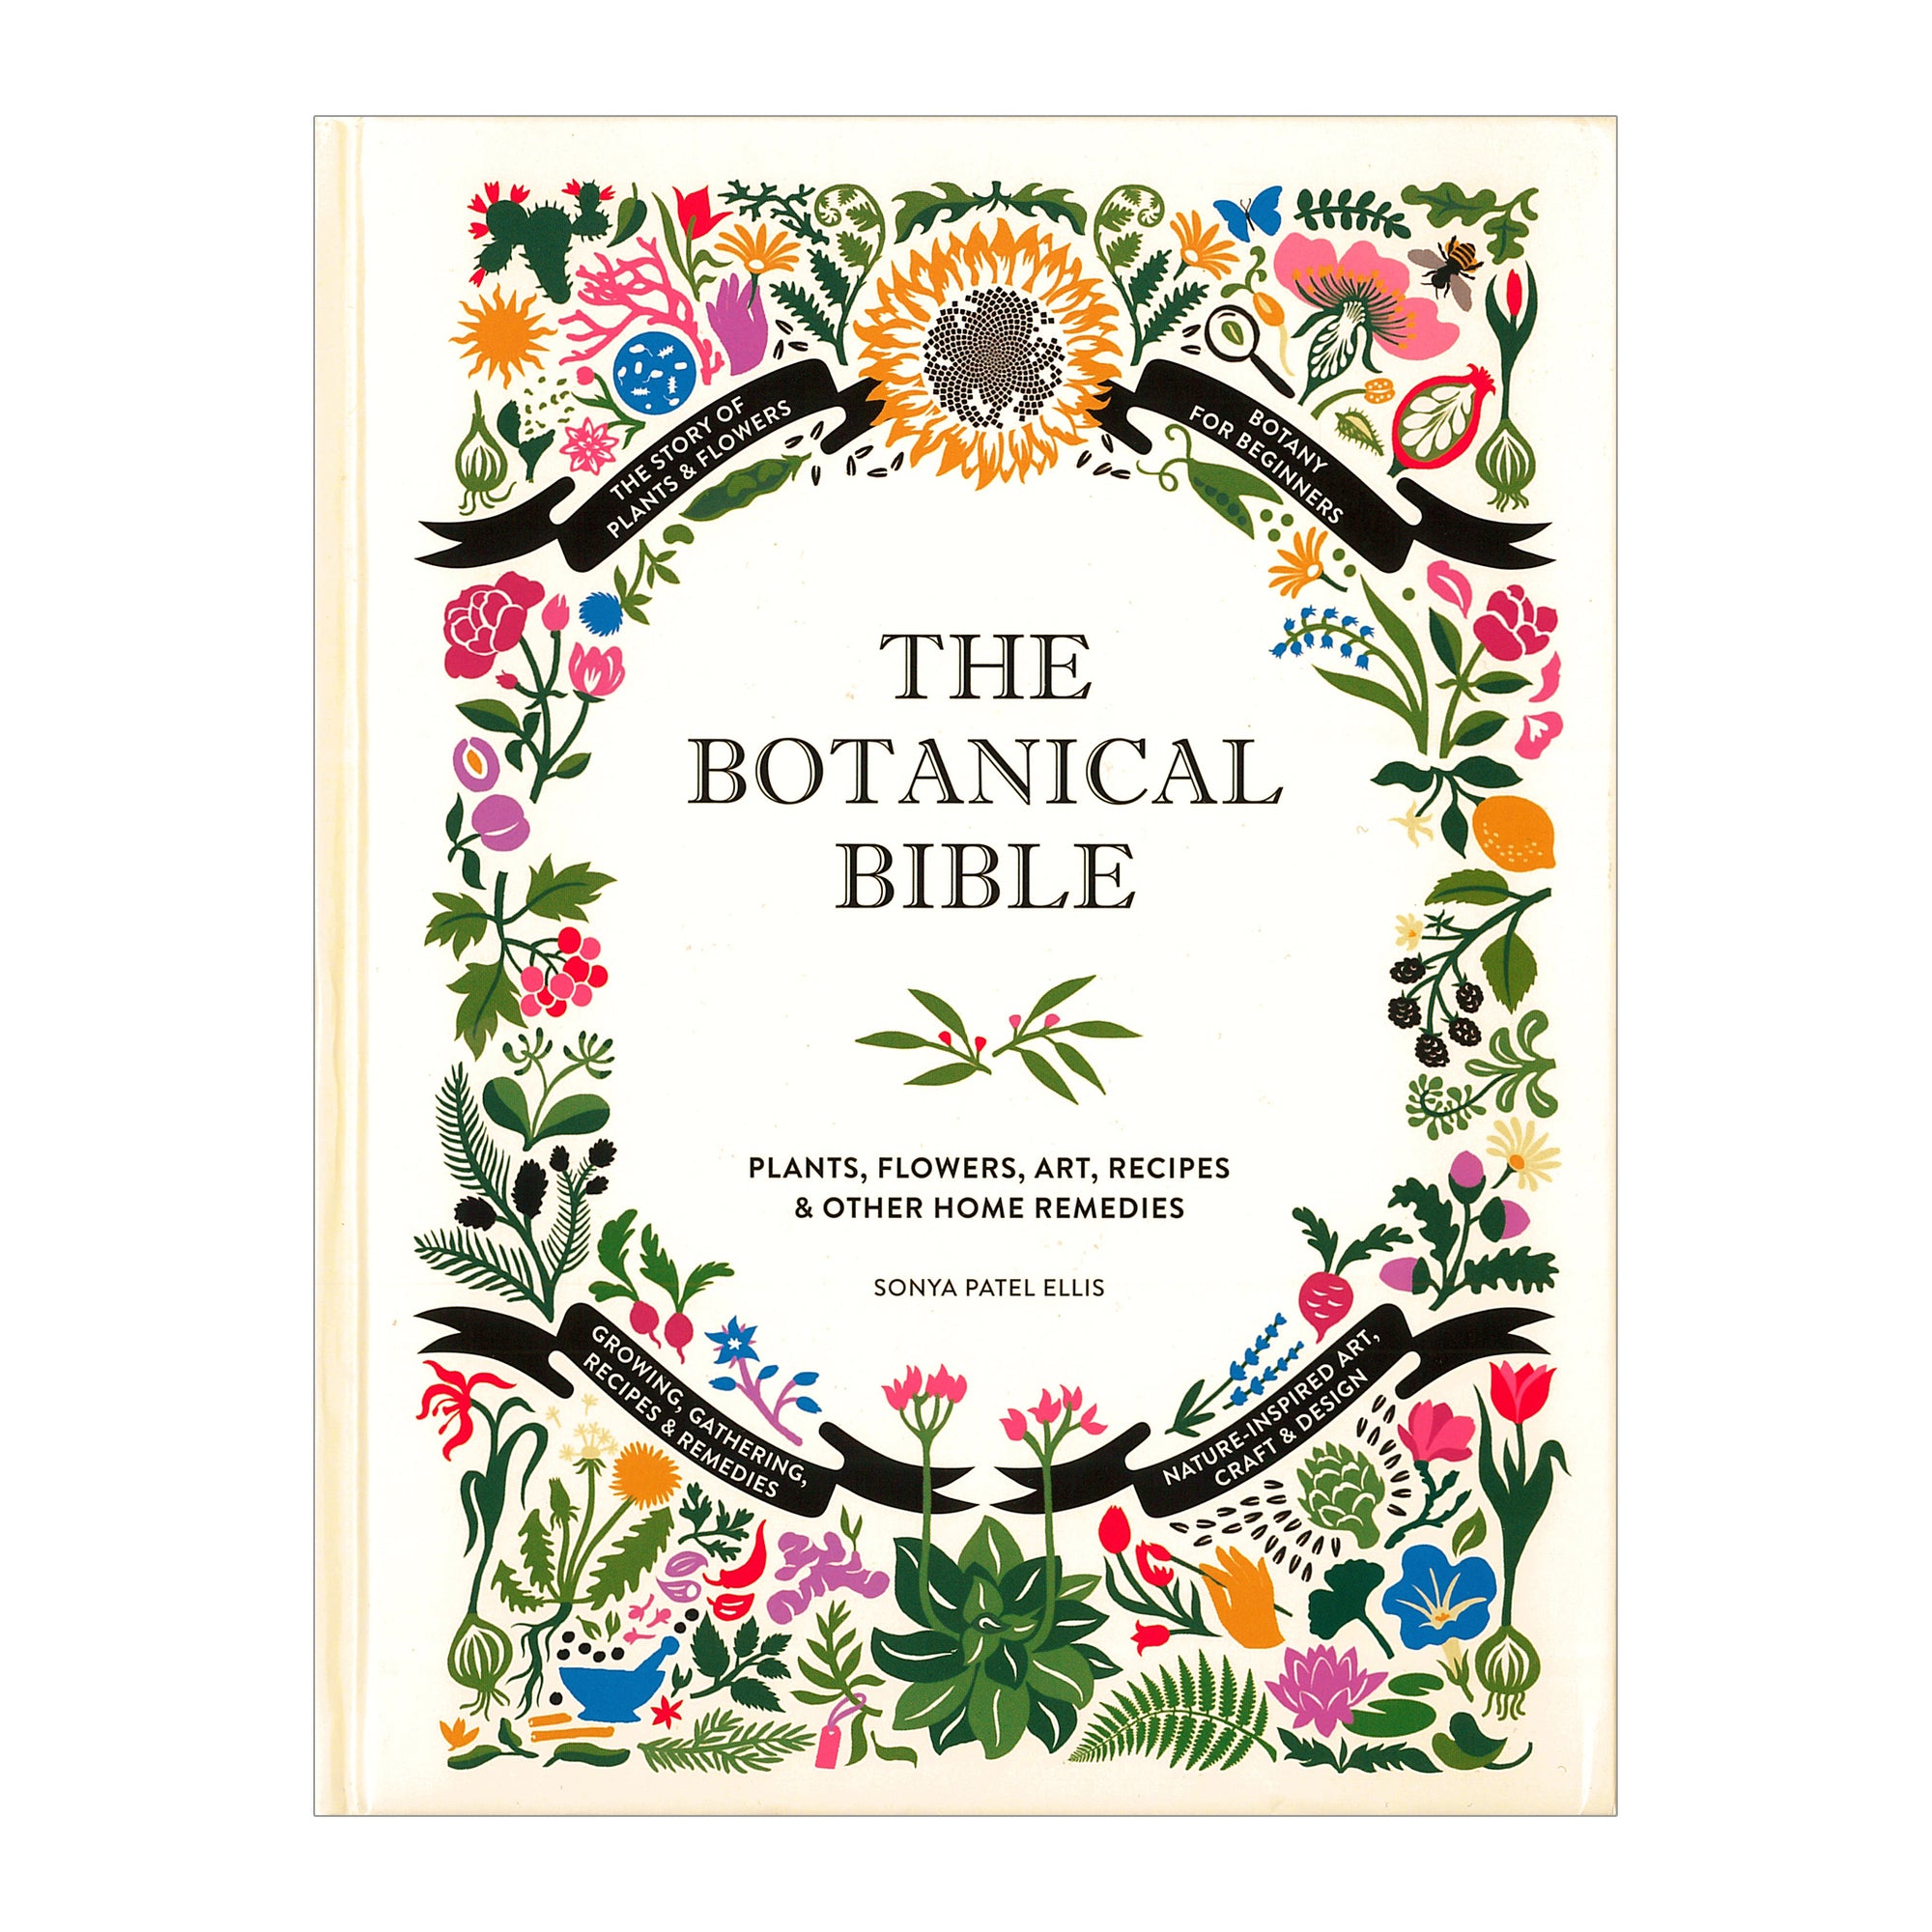 The Botanical Bible: Plants, Flowers, Art, Recipes & Other Home Uses | Getty Store